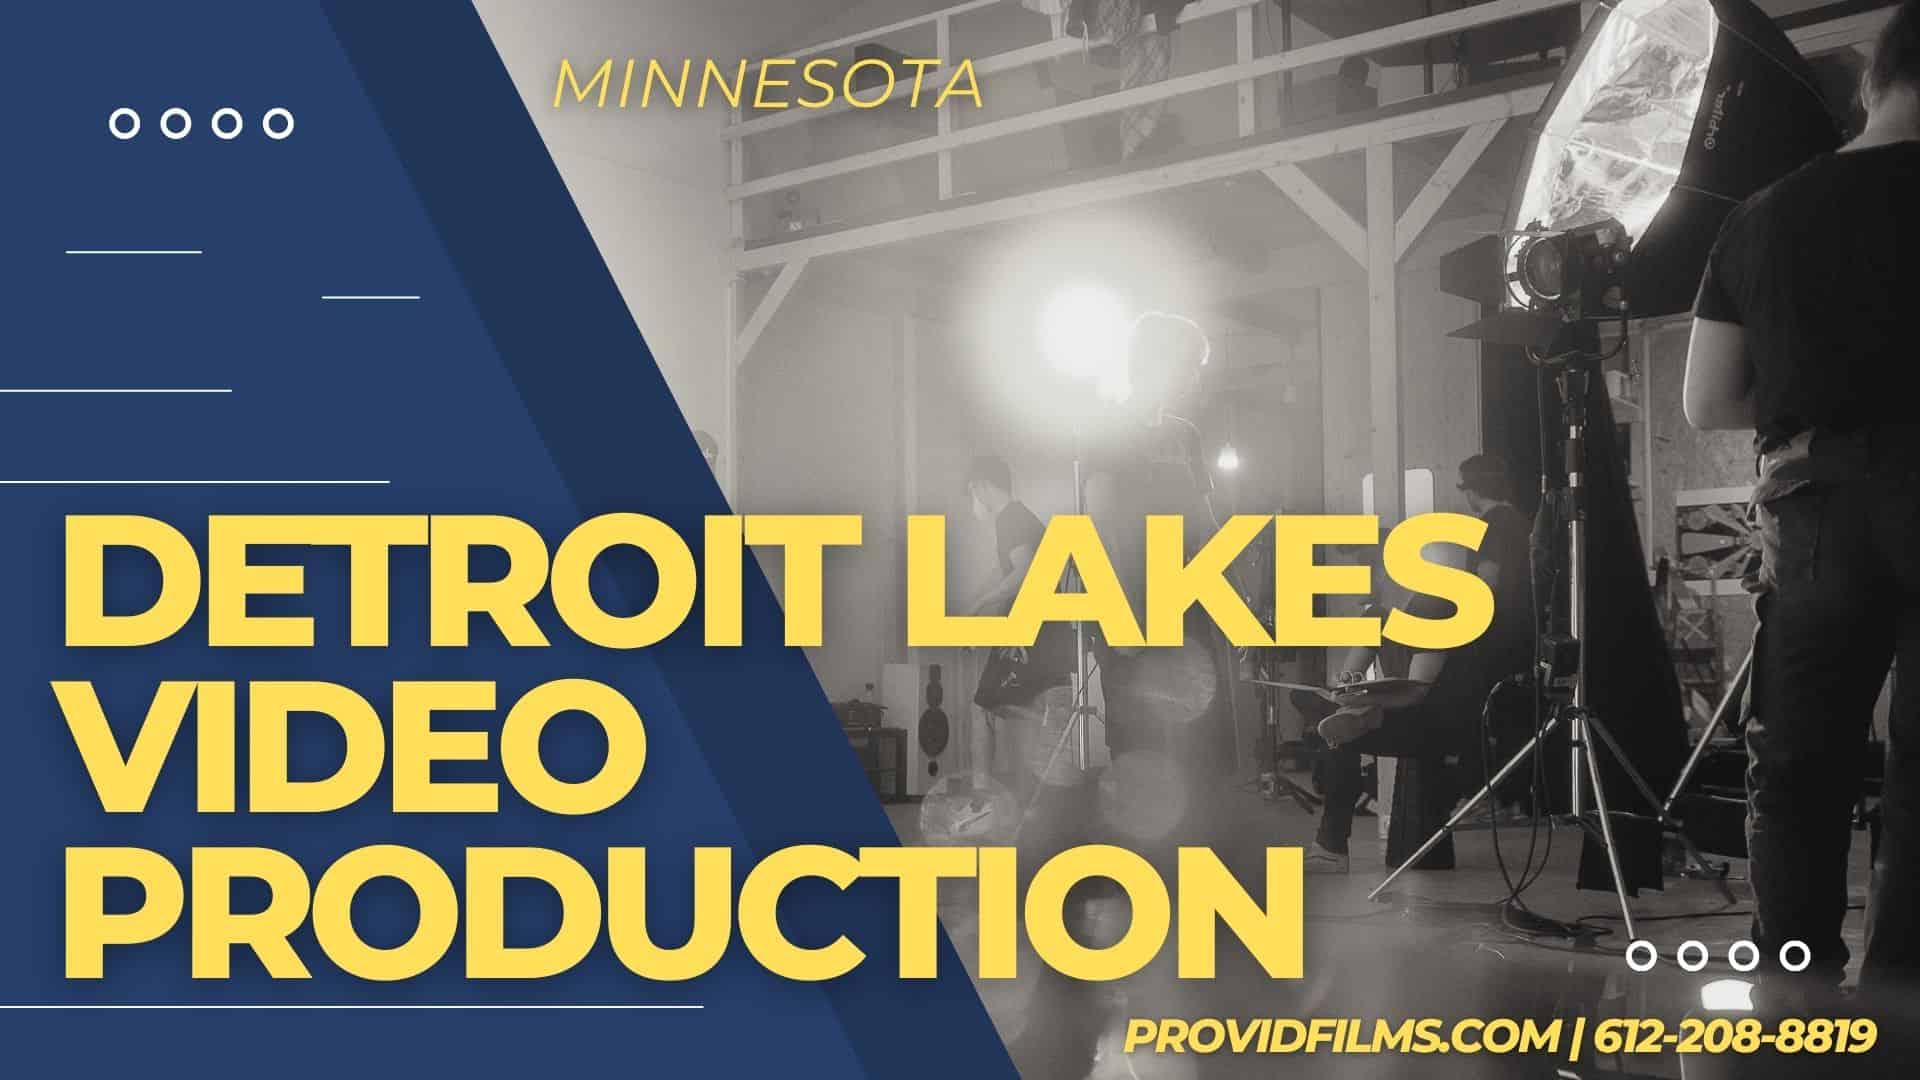 Graphic of a video camera with the text saying "Detroit Lakes Video Production"